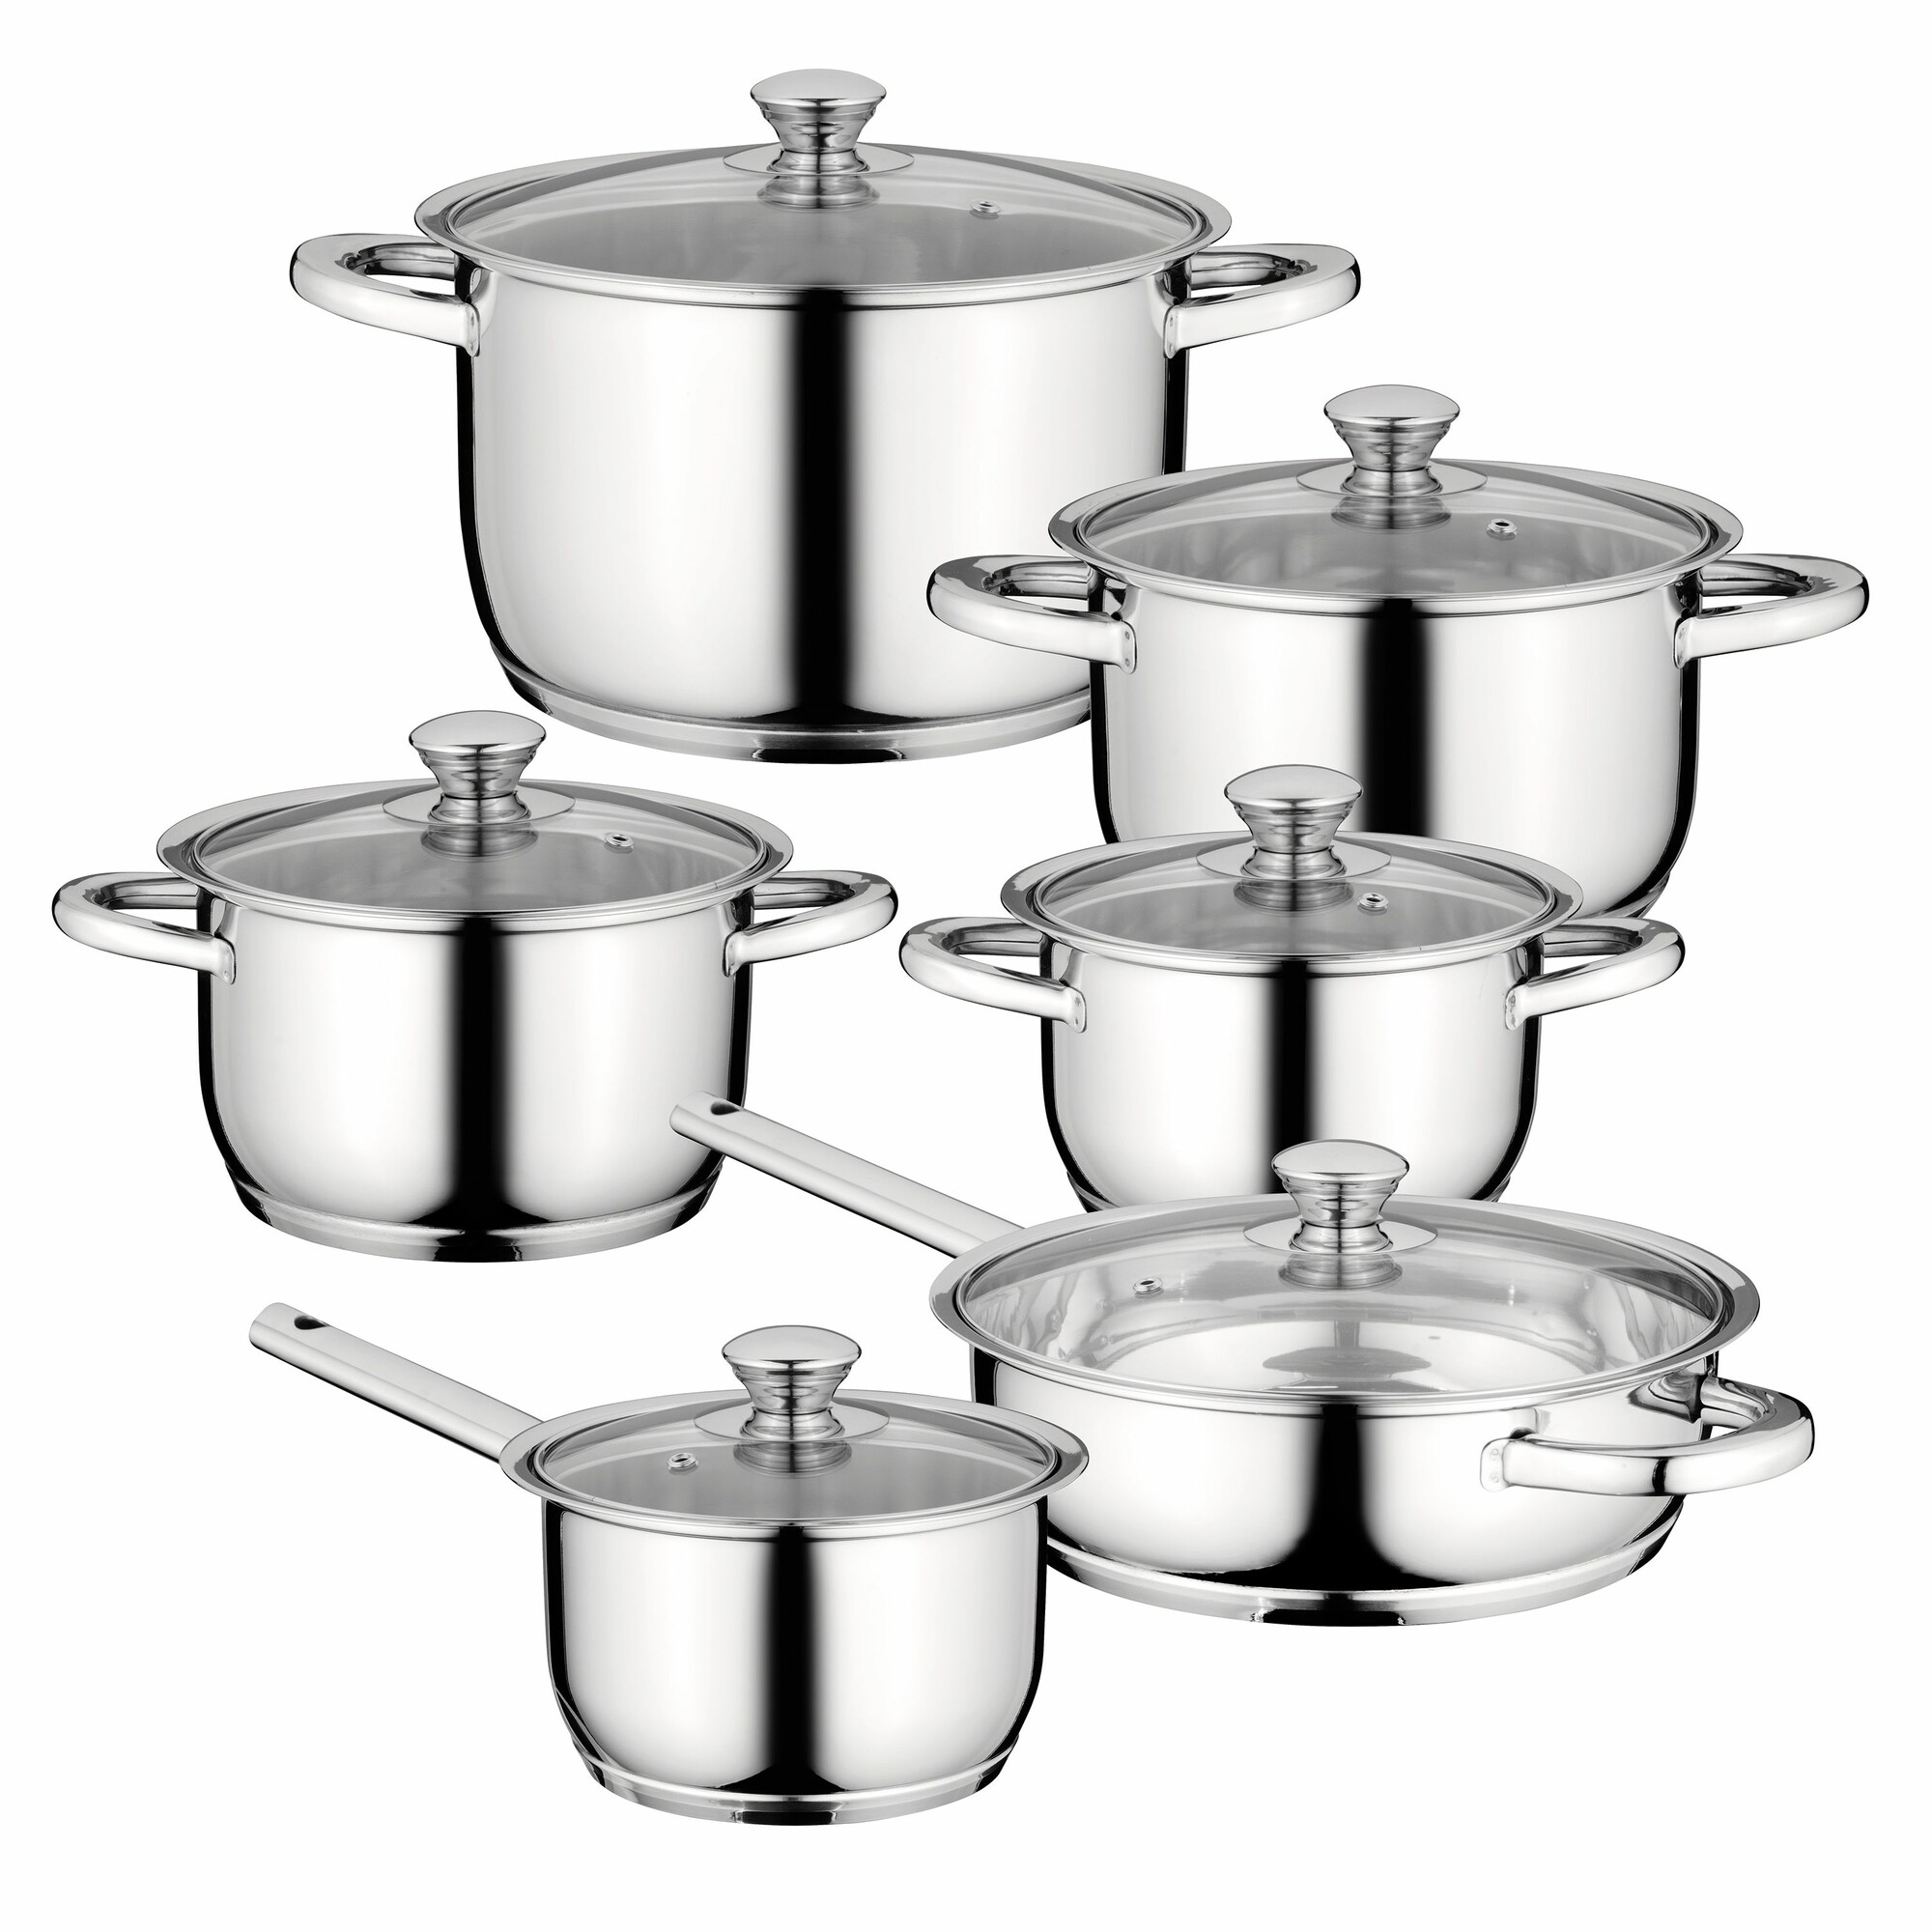 12pc Induction Non Stick Stainless Steel Cookware Kitchen Glass Lids Pot Pan Set